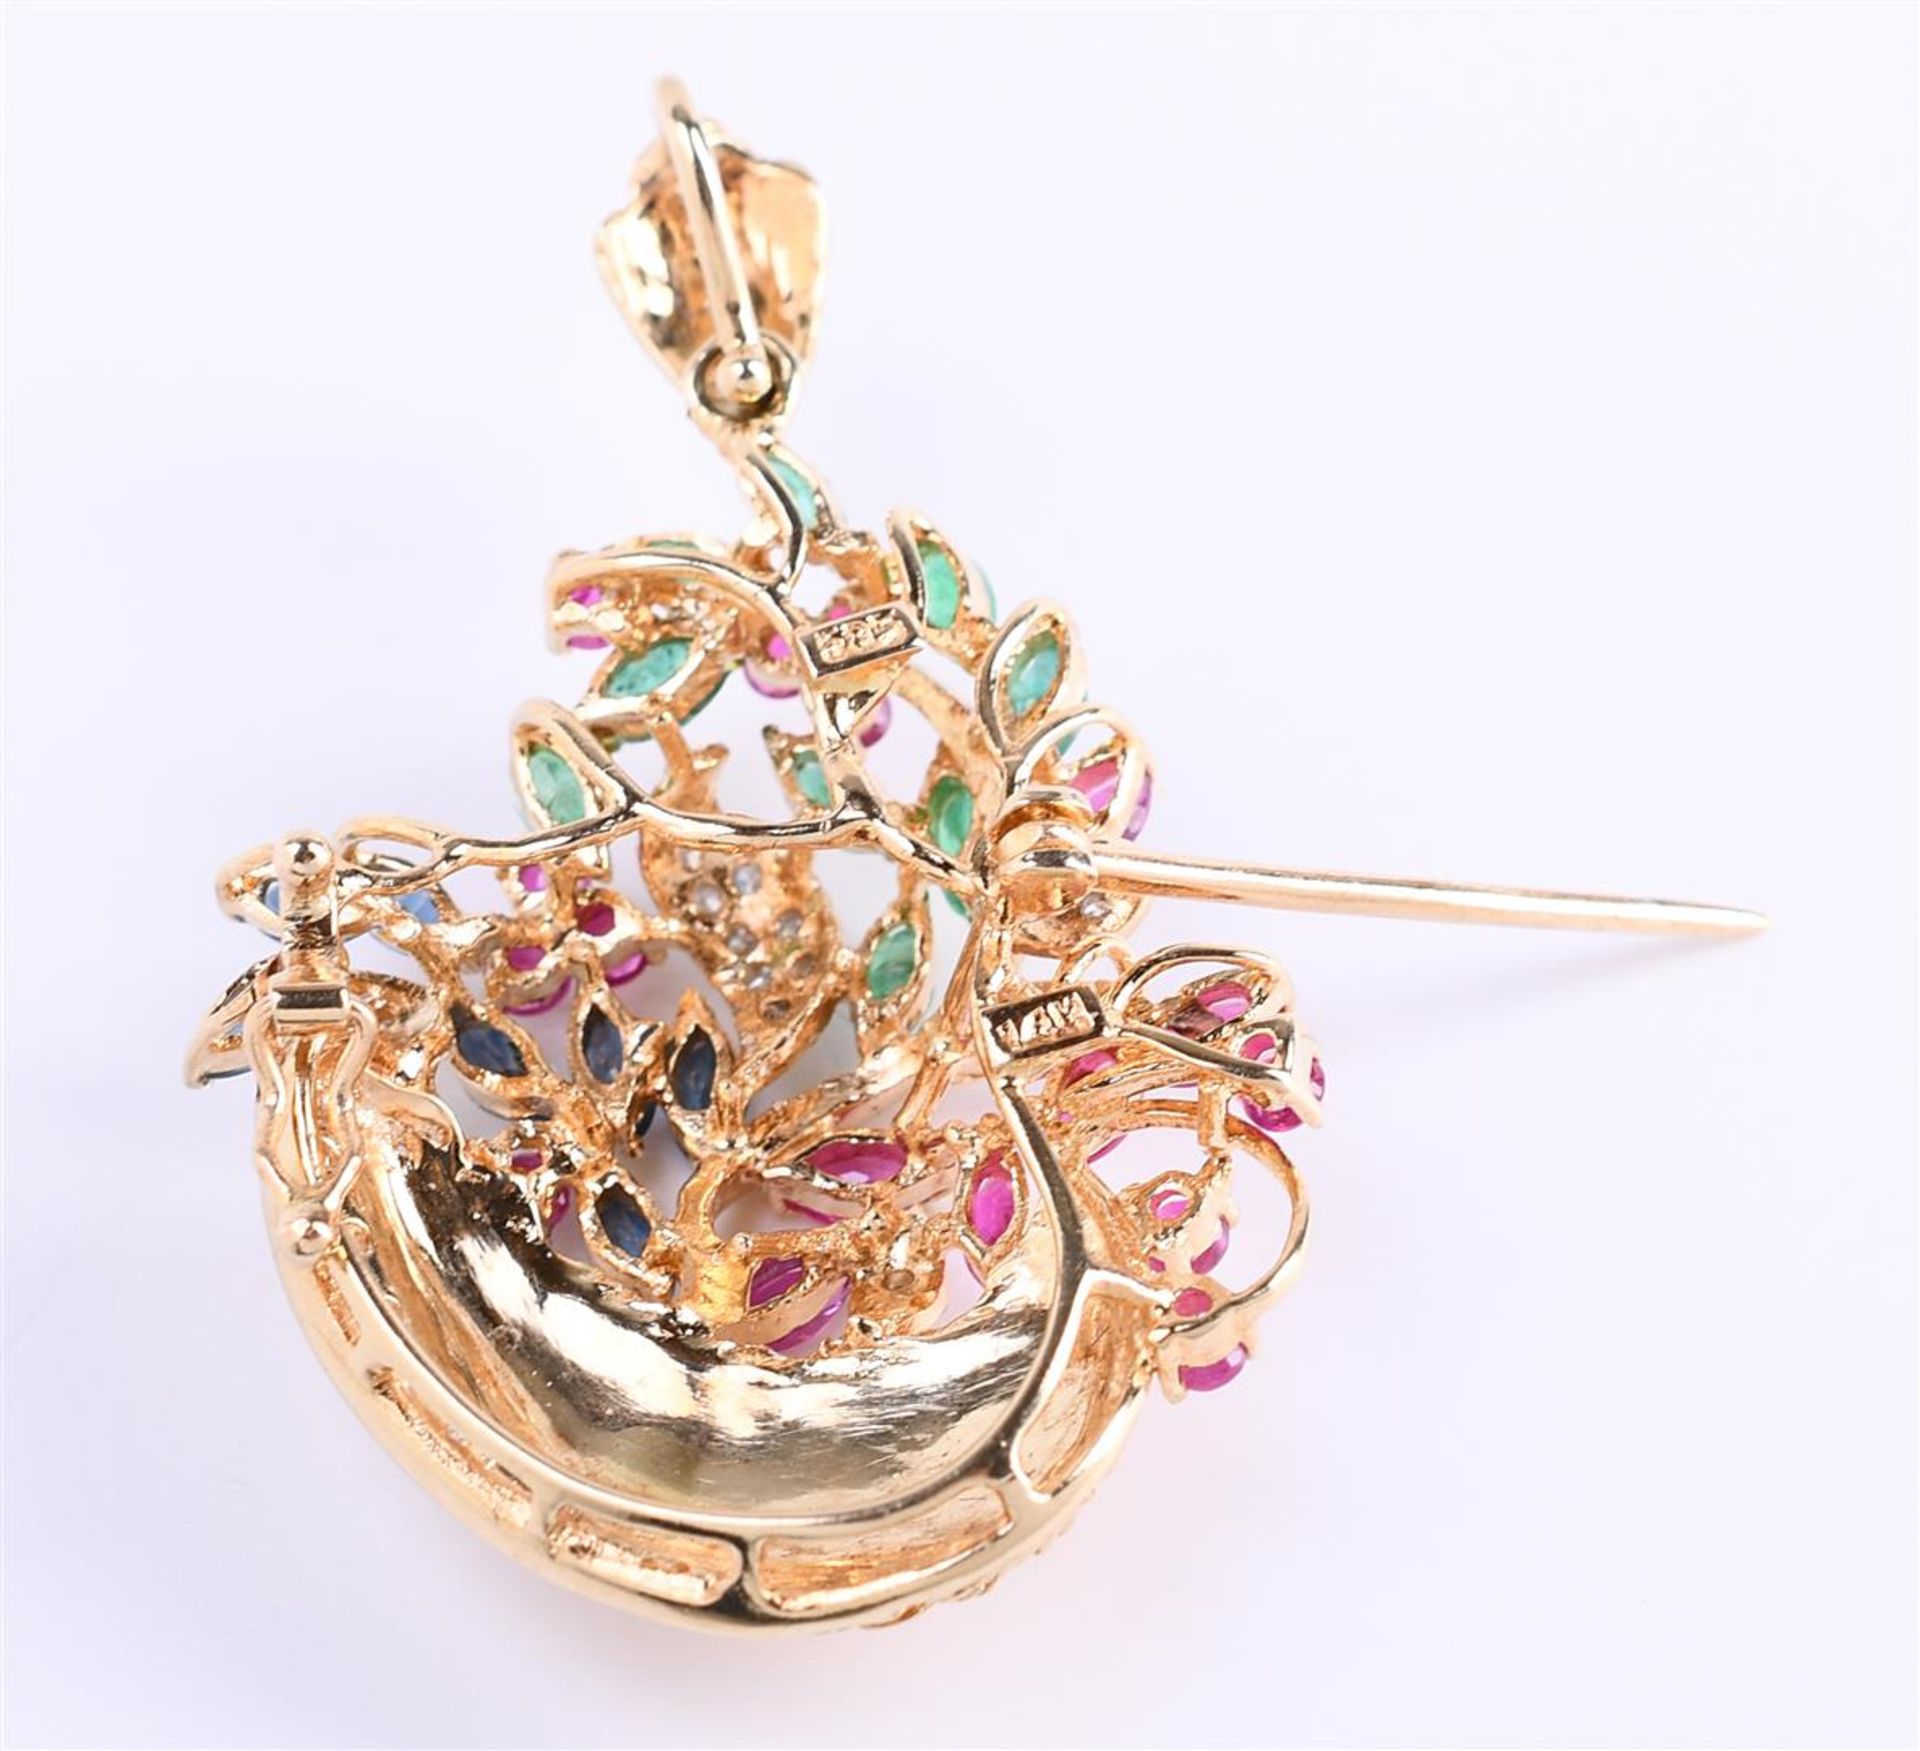 14 carat yellow gold ladies brooch and pendant combination of a flower basket (1960s-70s) - Image 3 of 6